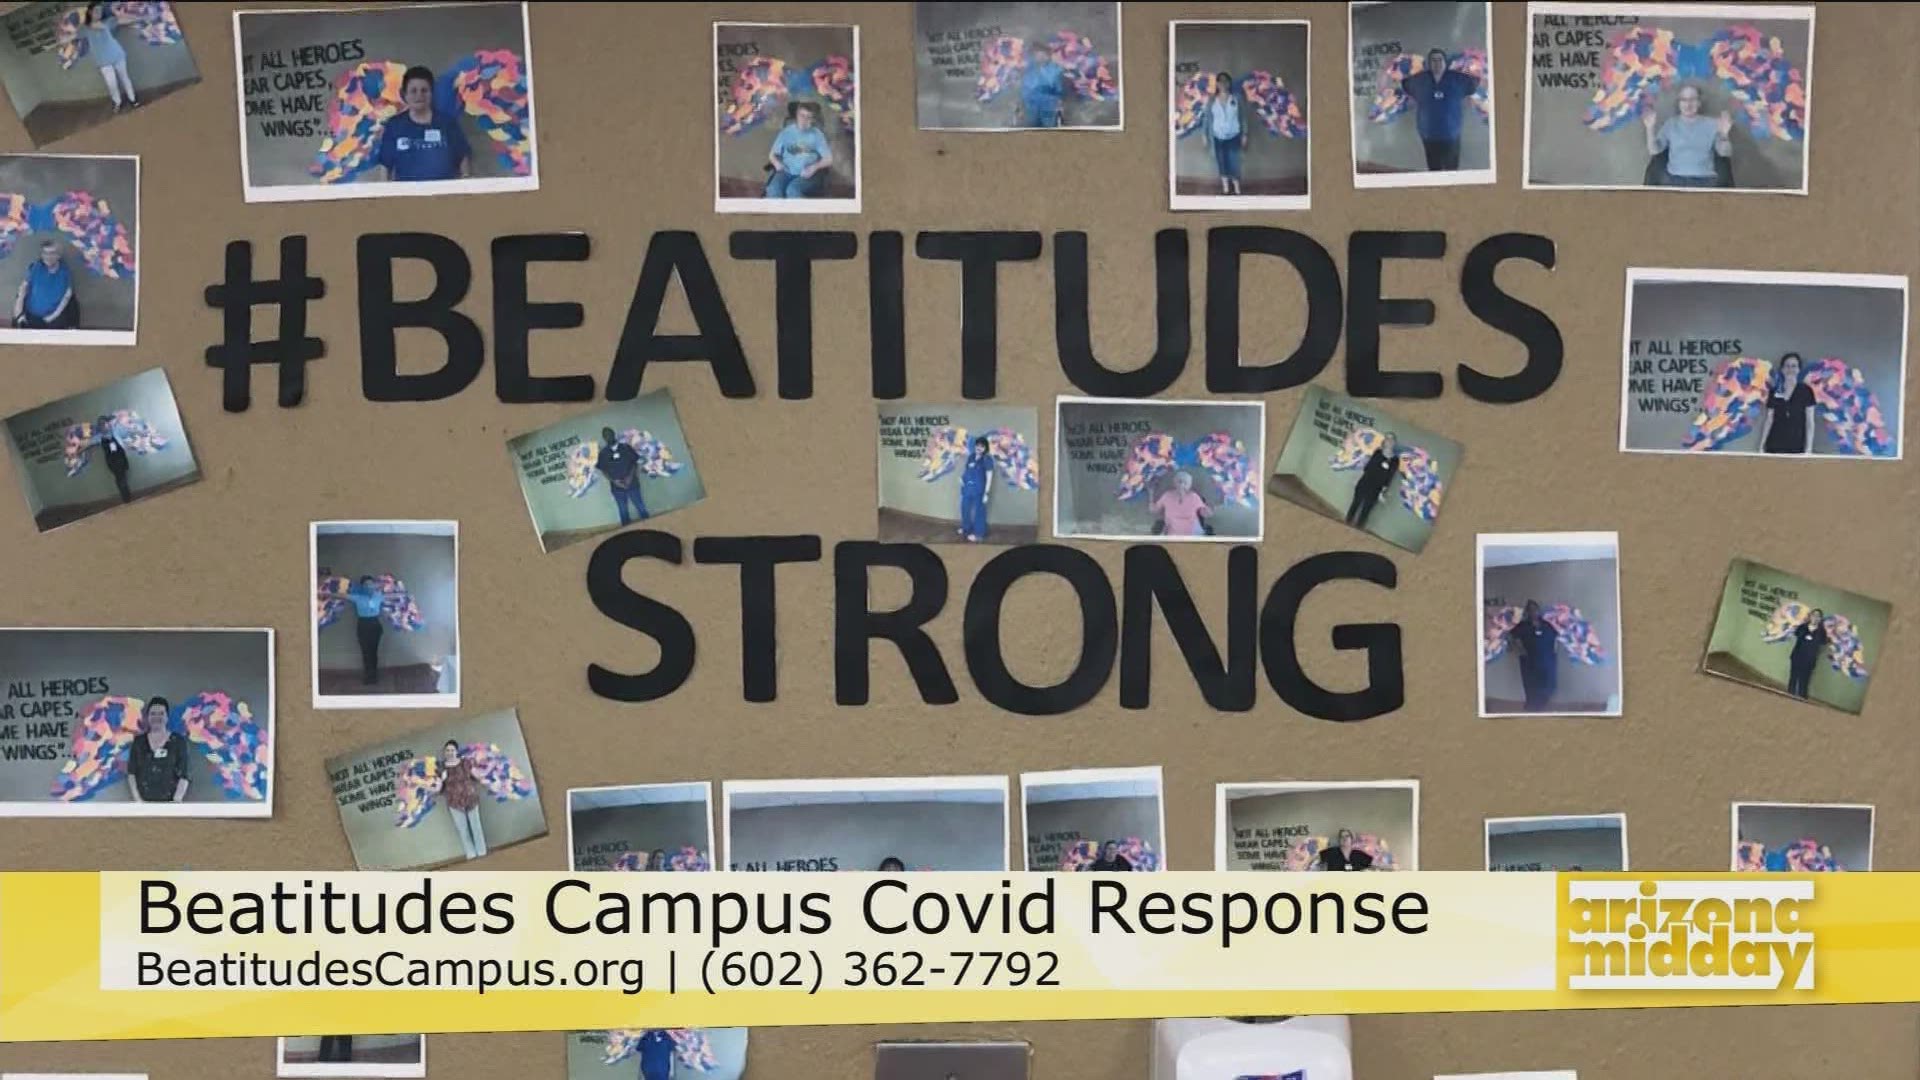 Michelle Just & Cheryl Knupp with Beatitudes share how their community is handling the pandemic